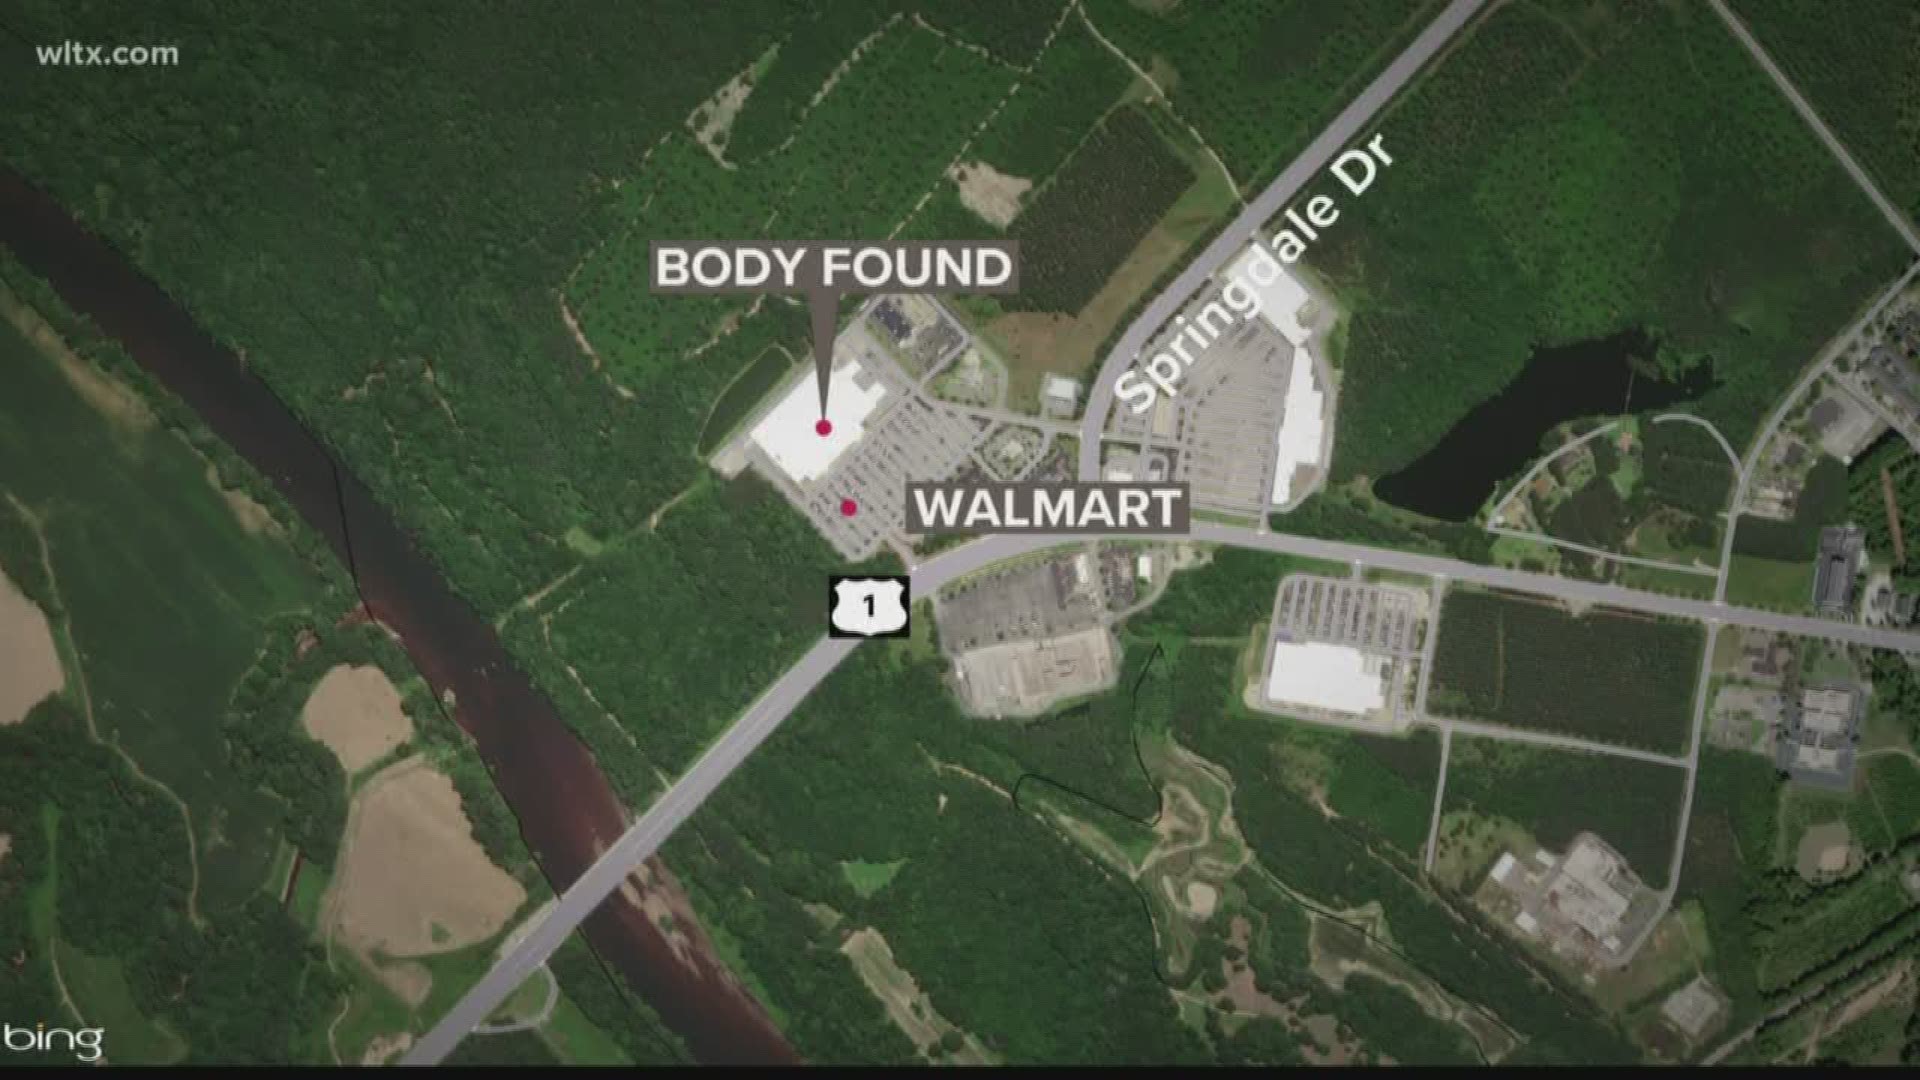 Kershaw County coroner David West confirms a woman's body was found with a gunshot wound at a Camden Walmart Wednesday afternoon.